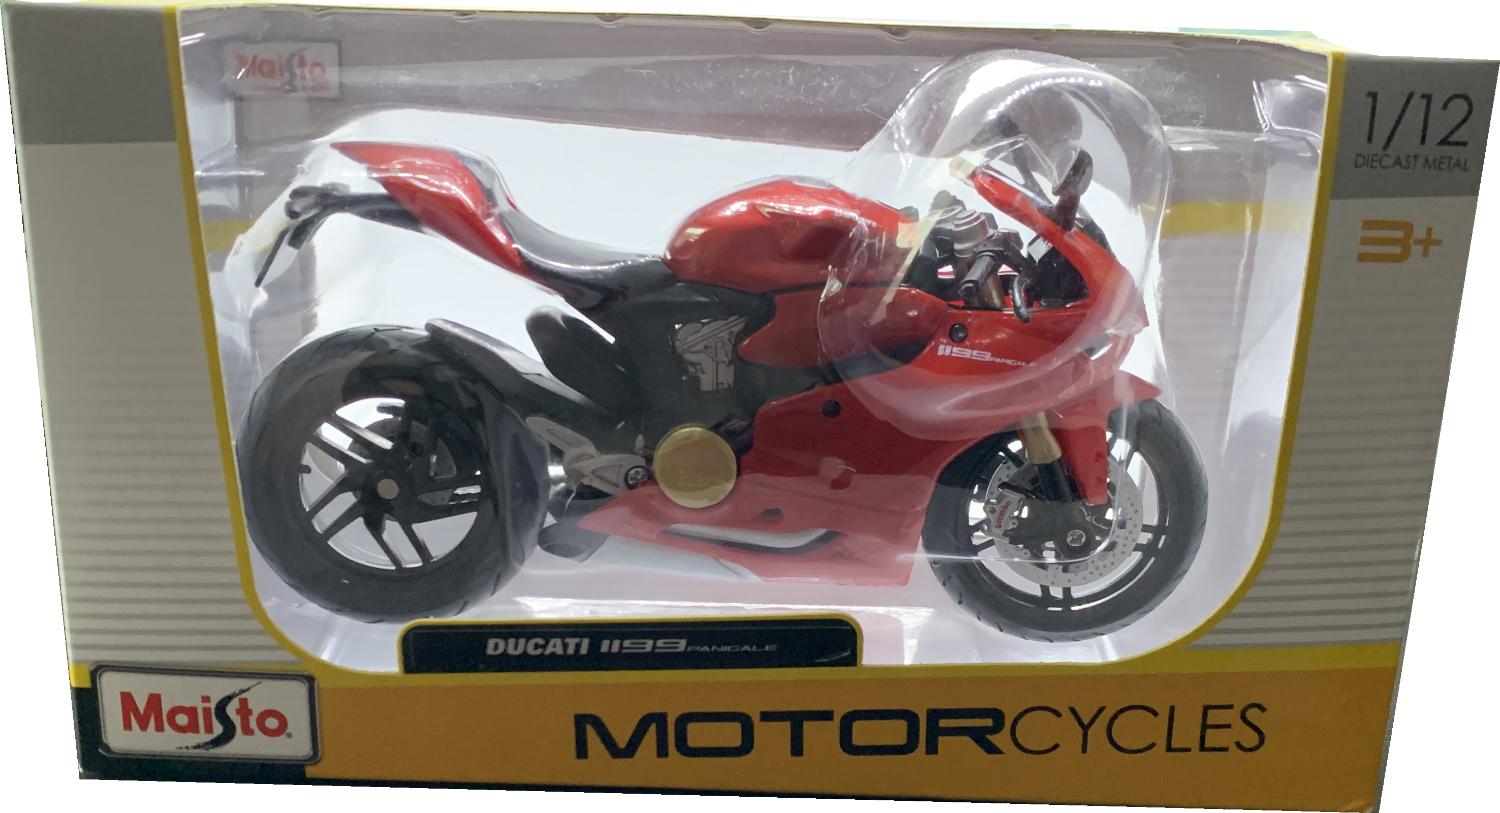 Ducati 1199 Panigale 2012 in red 1:12 scale model from Maisto